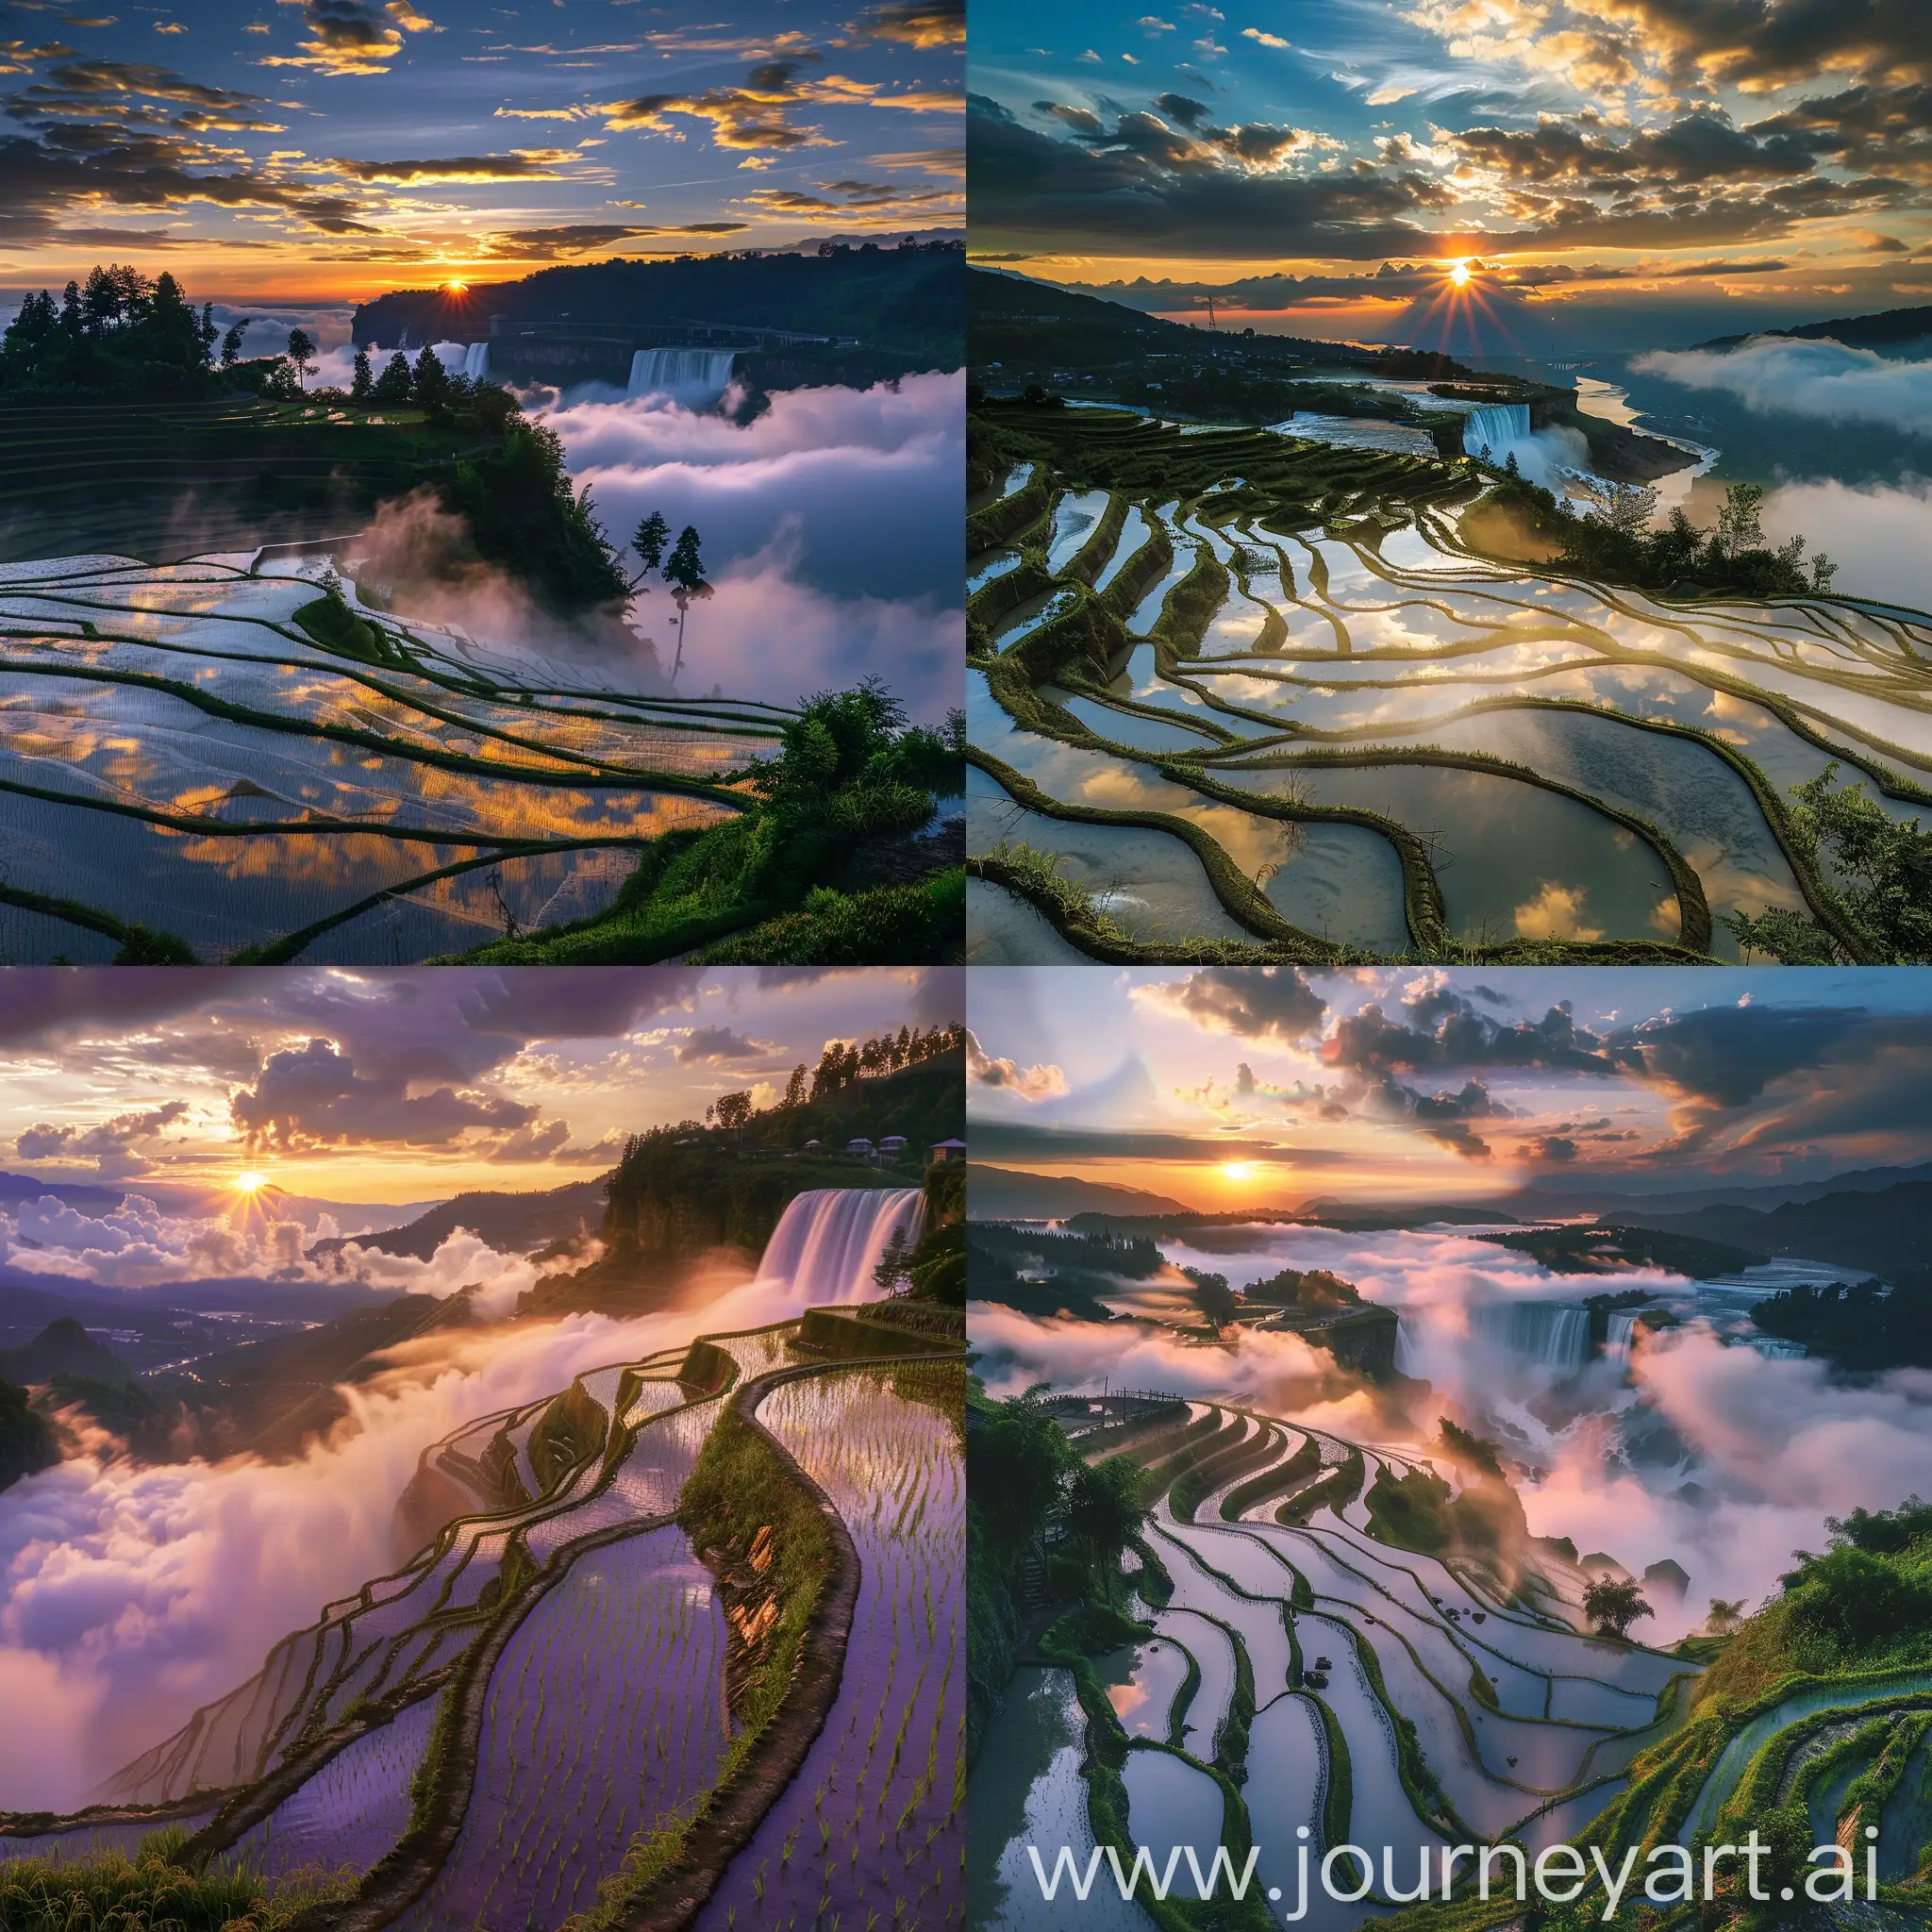 Majestic-Sunset-Over-Yushan-Rice-Fields-in-the-Style-of-Traditional-Grid-Landscapes